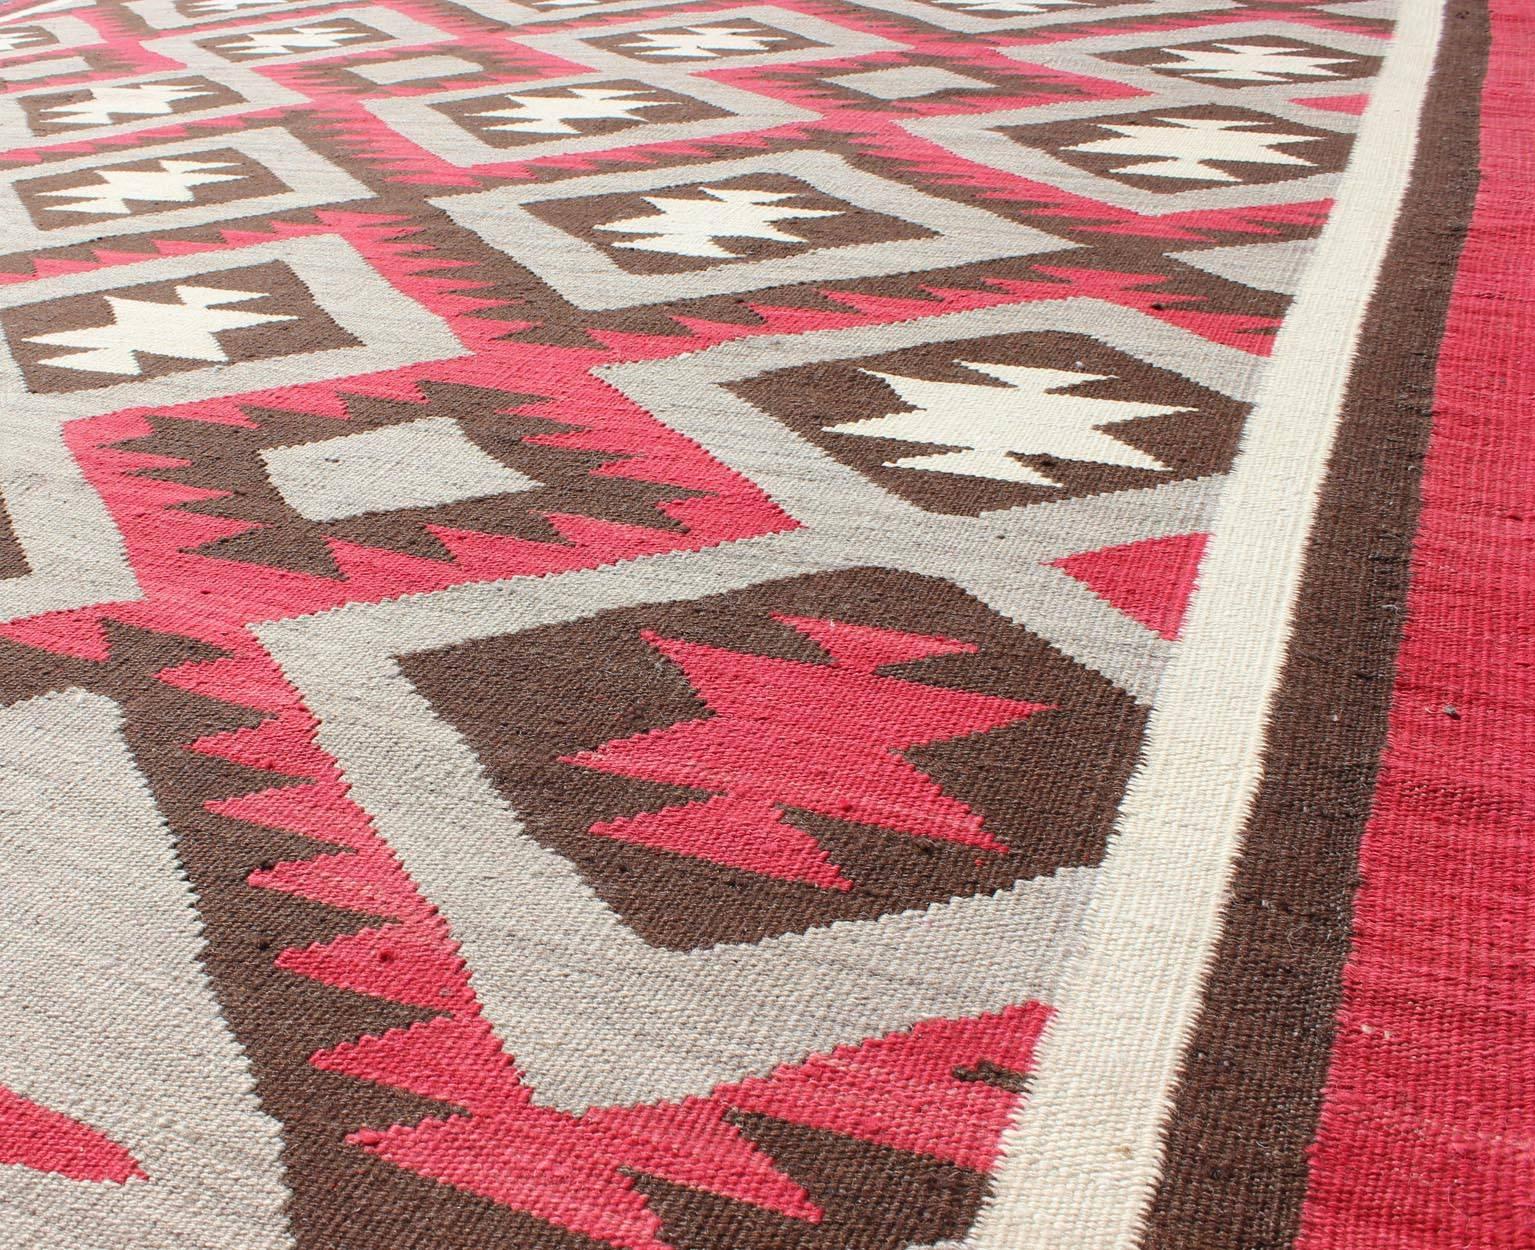 Contemporary Large American Navajo Design Rug with Latticework Tribal Design in Red and Gray